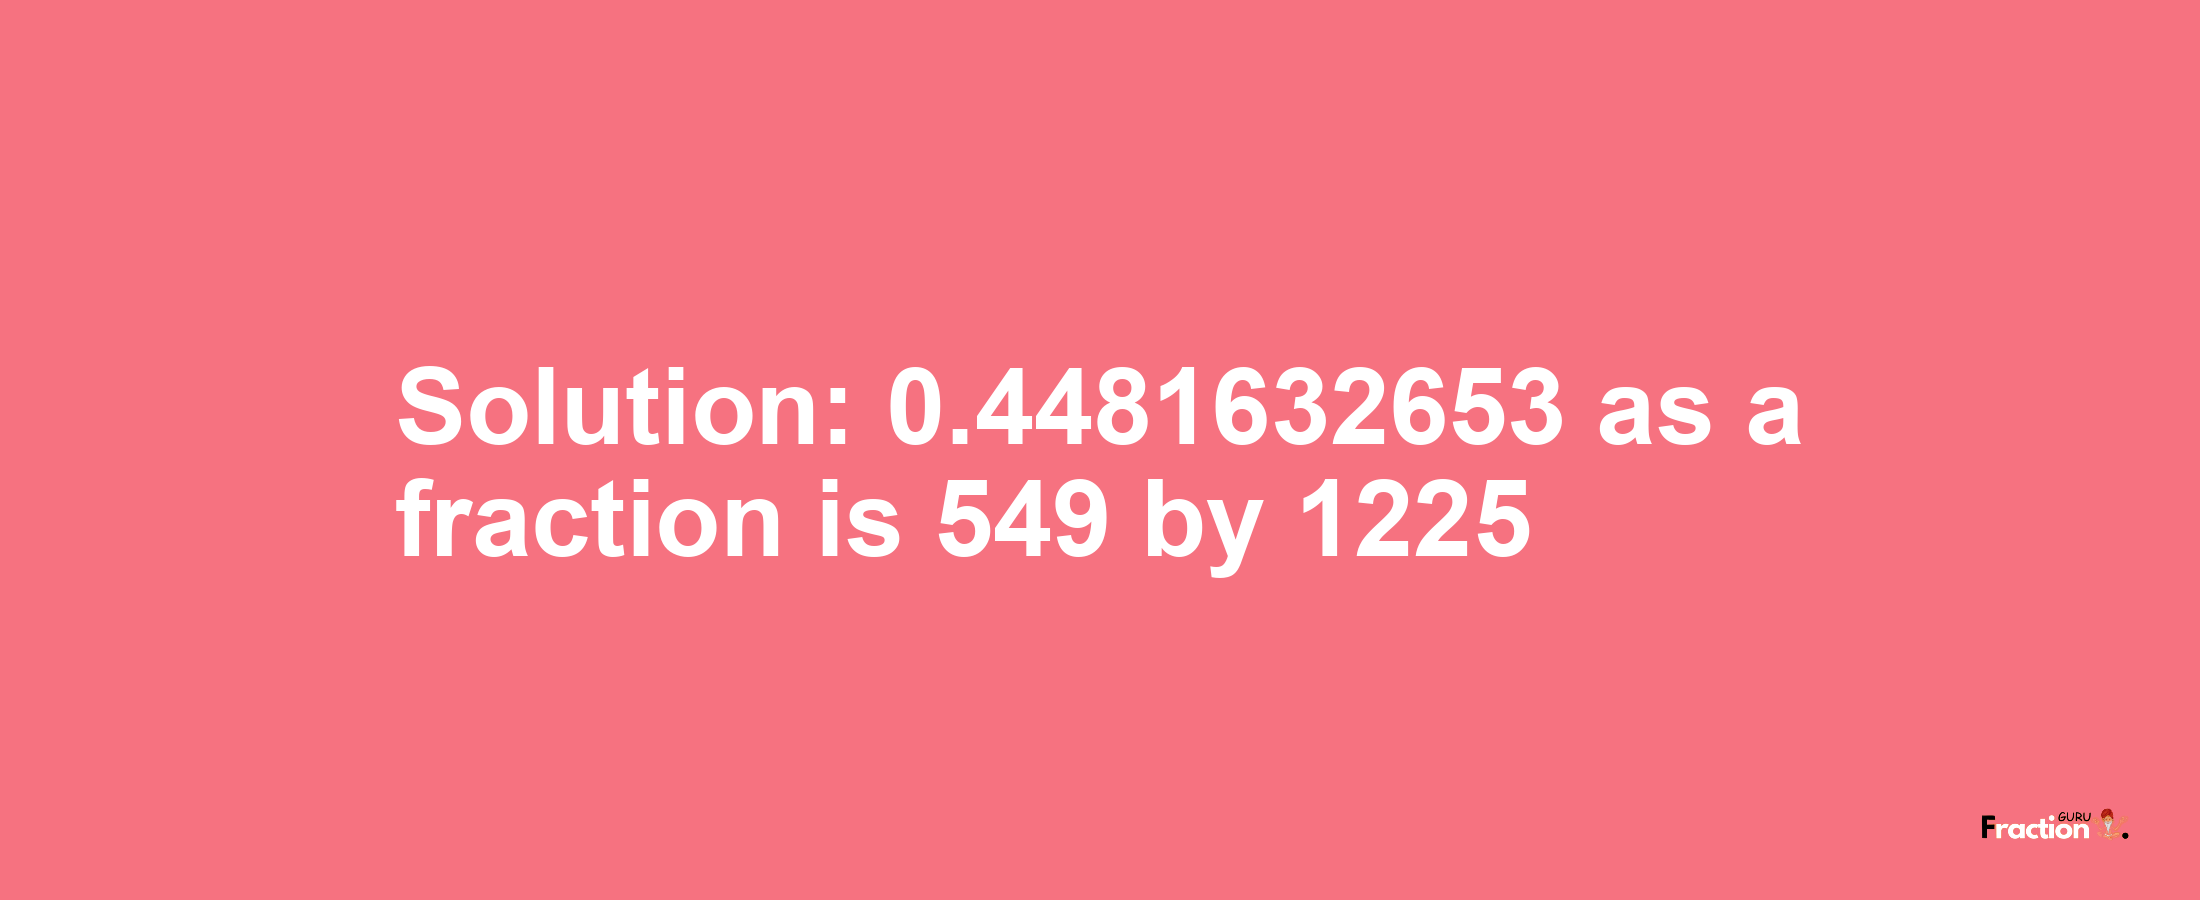 Solution:0.4481632653 as a fraction is 549/1225